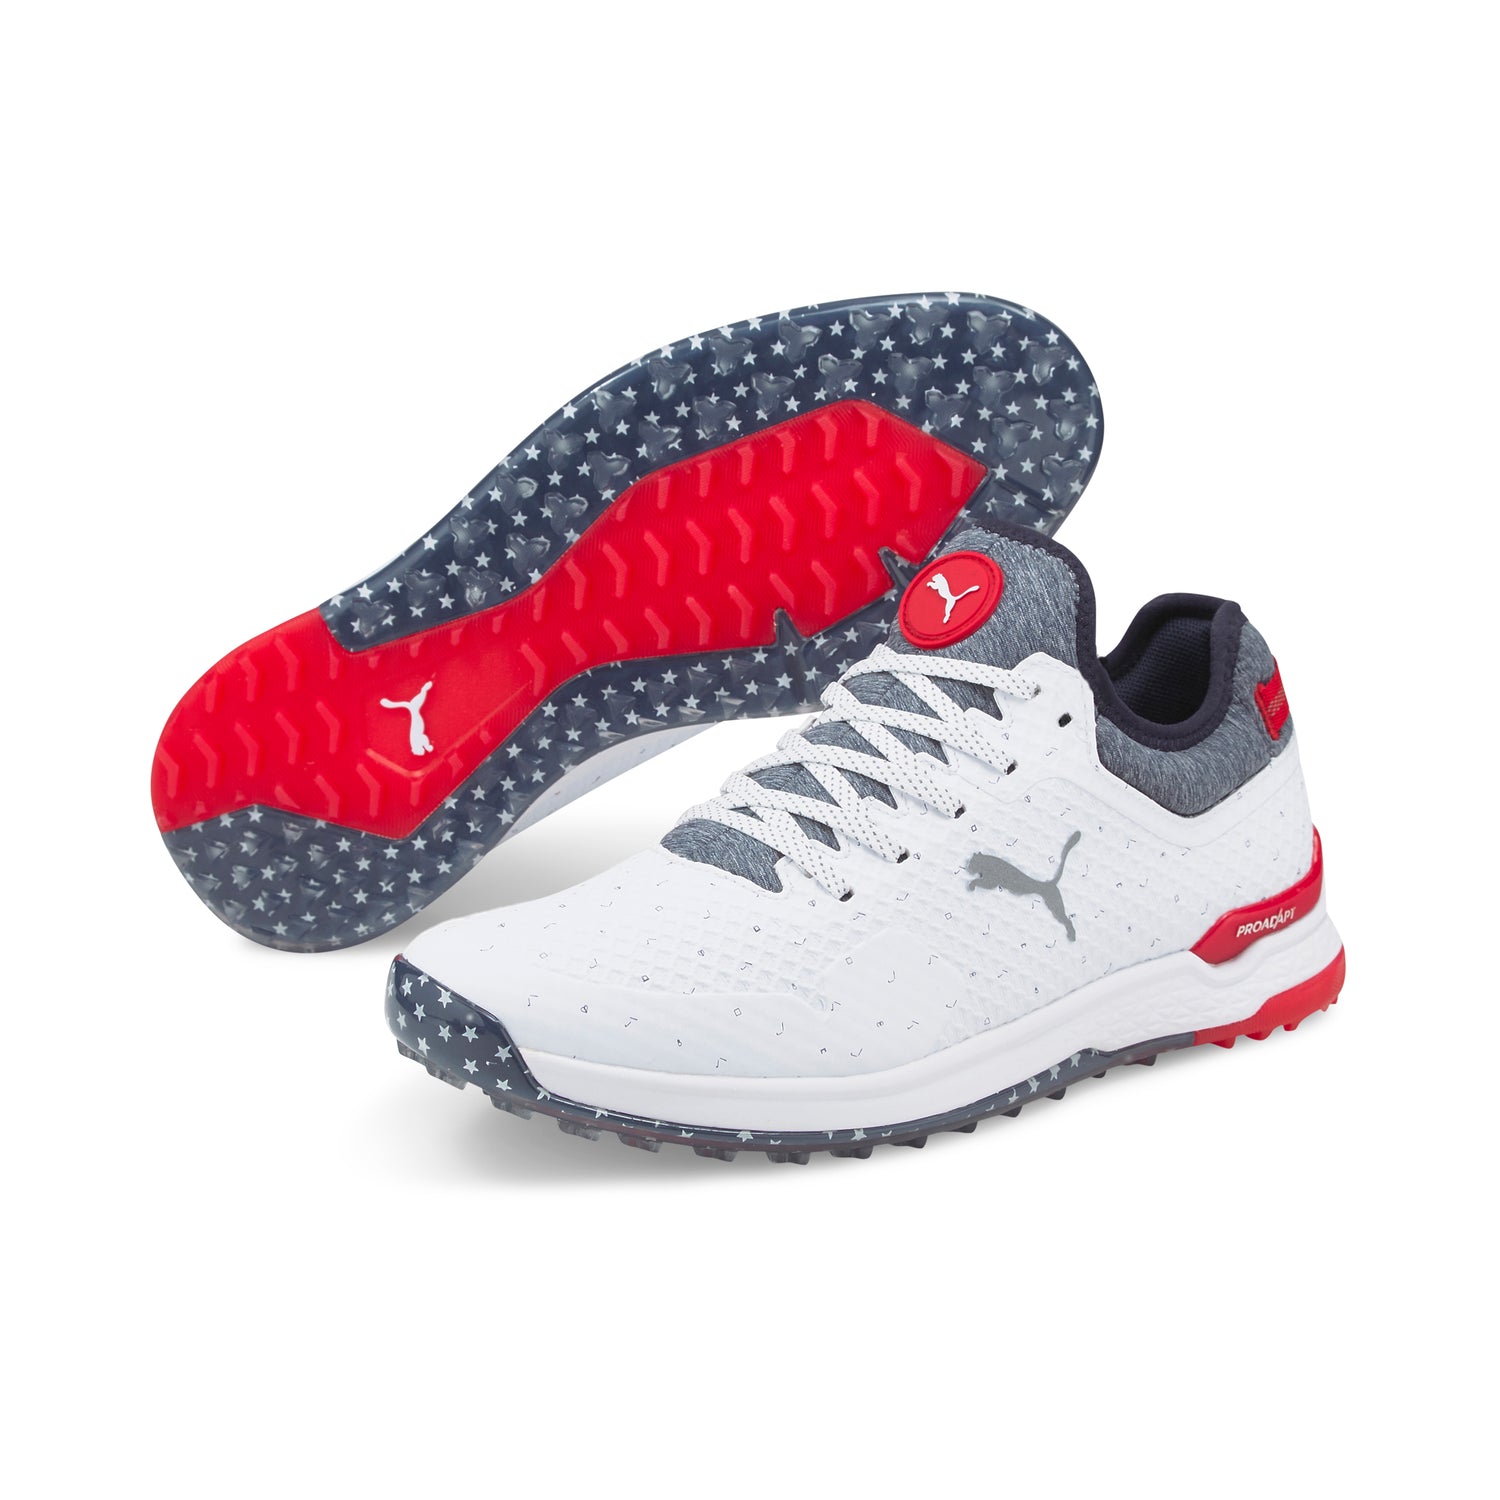 Limited Edition - PROADAPT ALPHACAT Love H8 Spikeless Golf Shoes